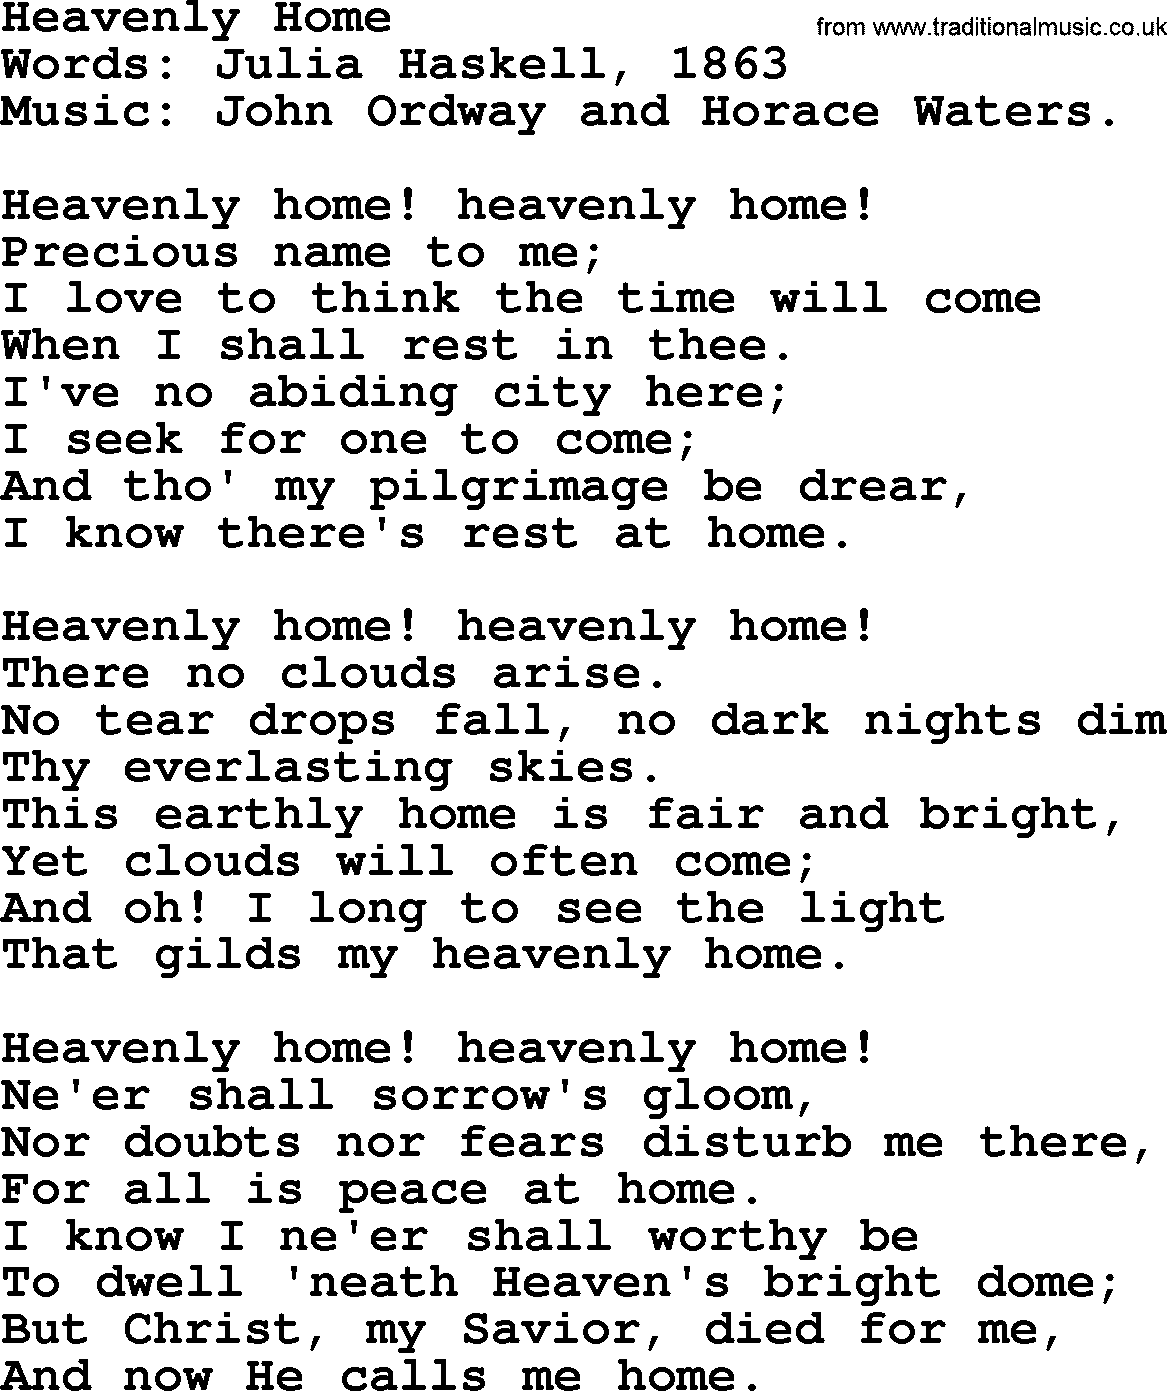 Songs and Hymns about Heaven: Heavenly Home lyrics with PDF